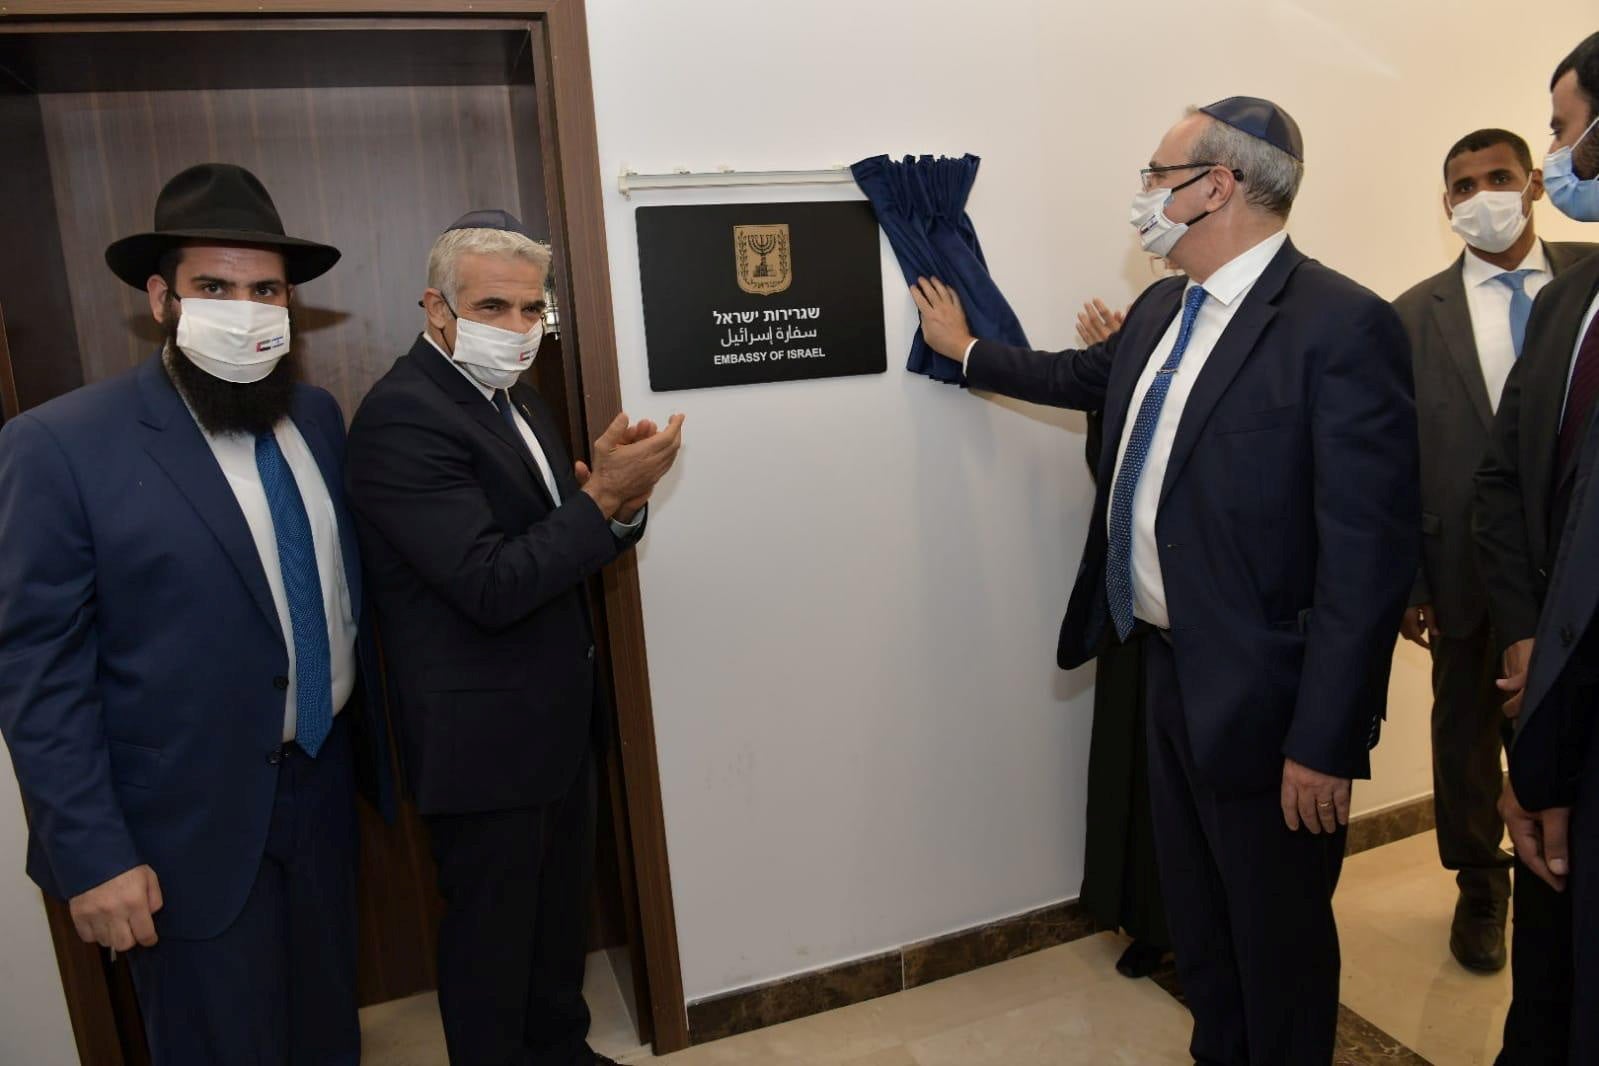 Israeli Foreign Minister Yair Lapid applauds as a plaque is revealed during an inauguration ceremony of Israel's embassy in Abu Dhabi, United Arab Emirates, on Tuesday